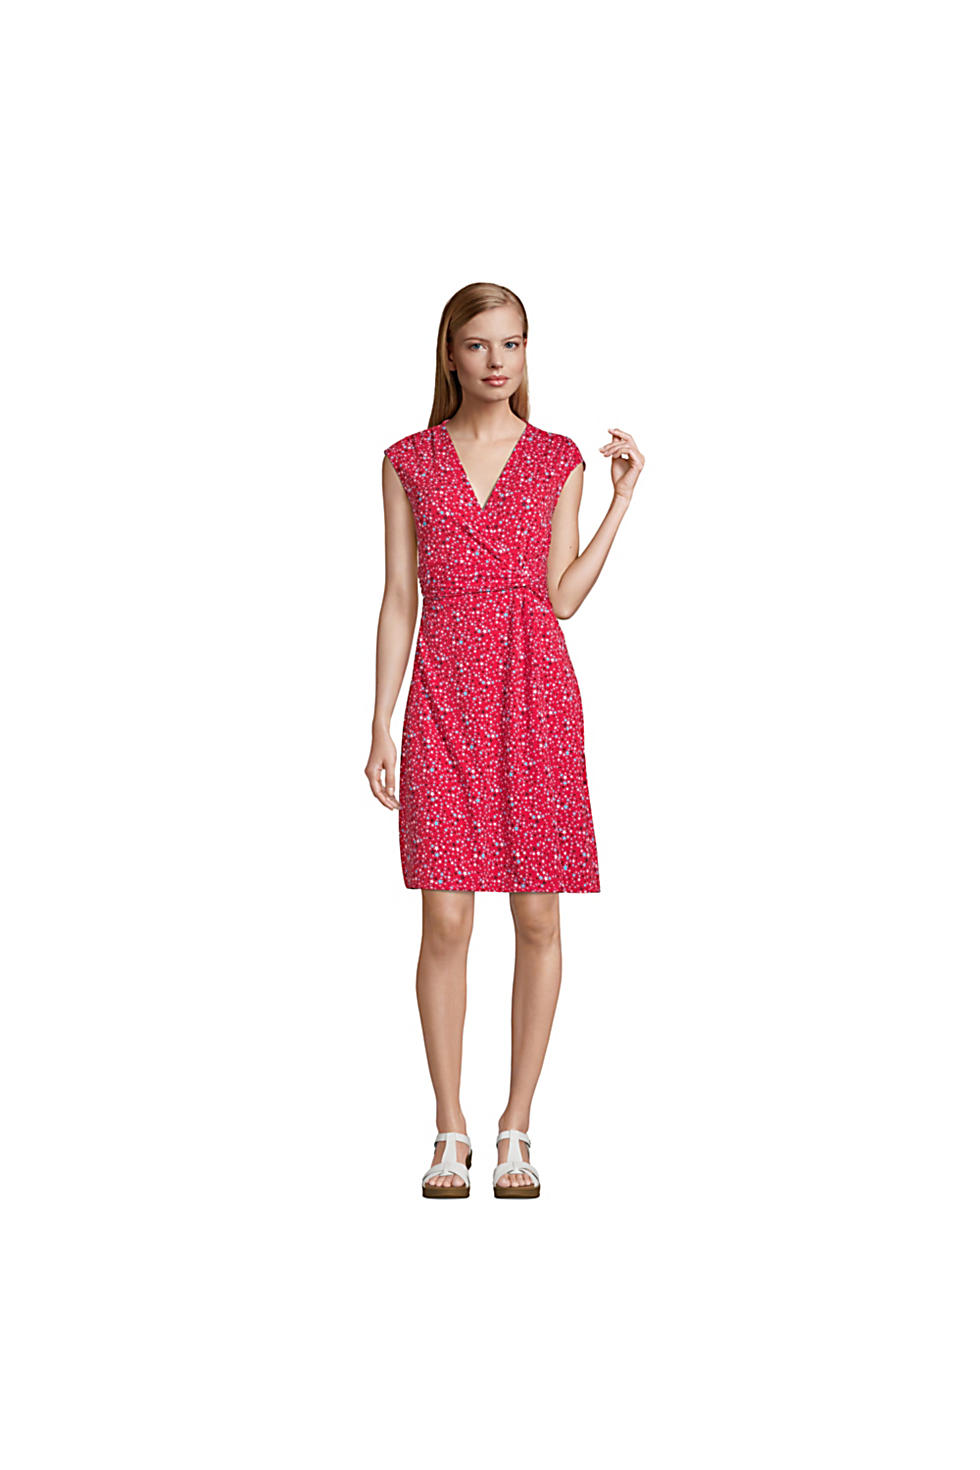 Lands End Women's Cotton Modal Jersey Surplice Fit and Flare Dress ( Compass Red Multi Stars)